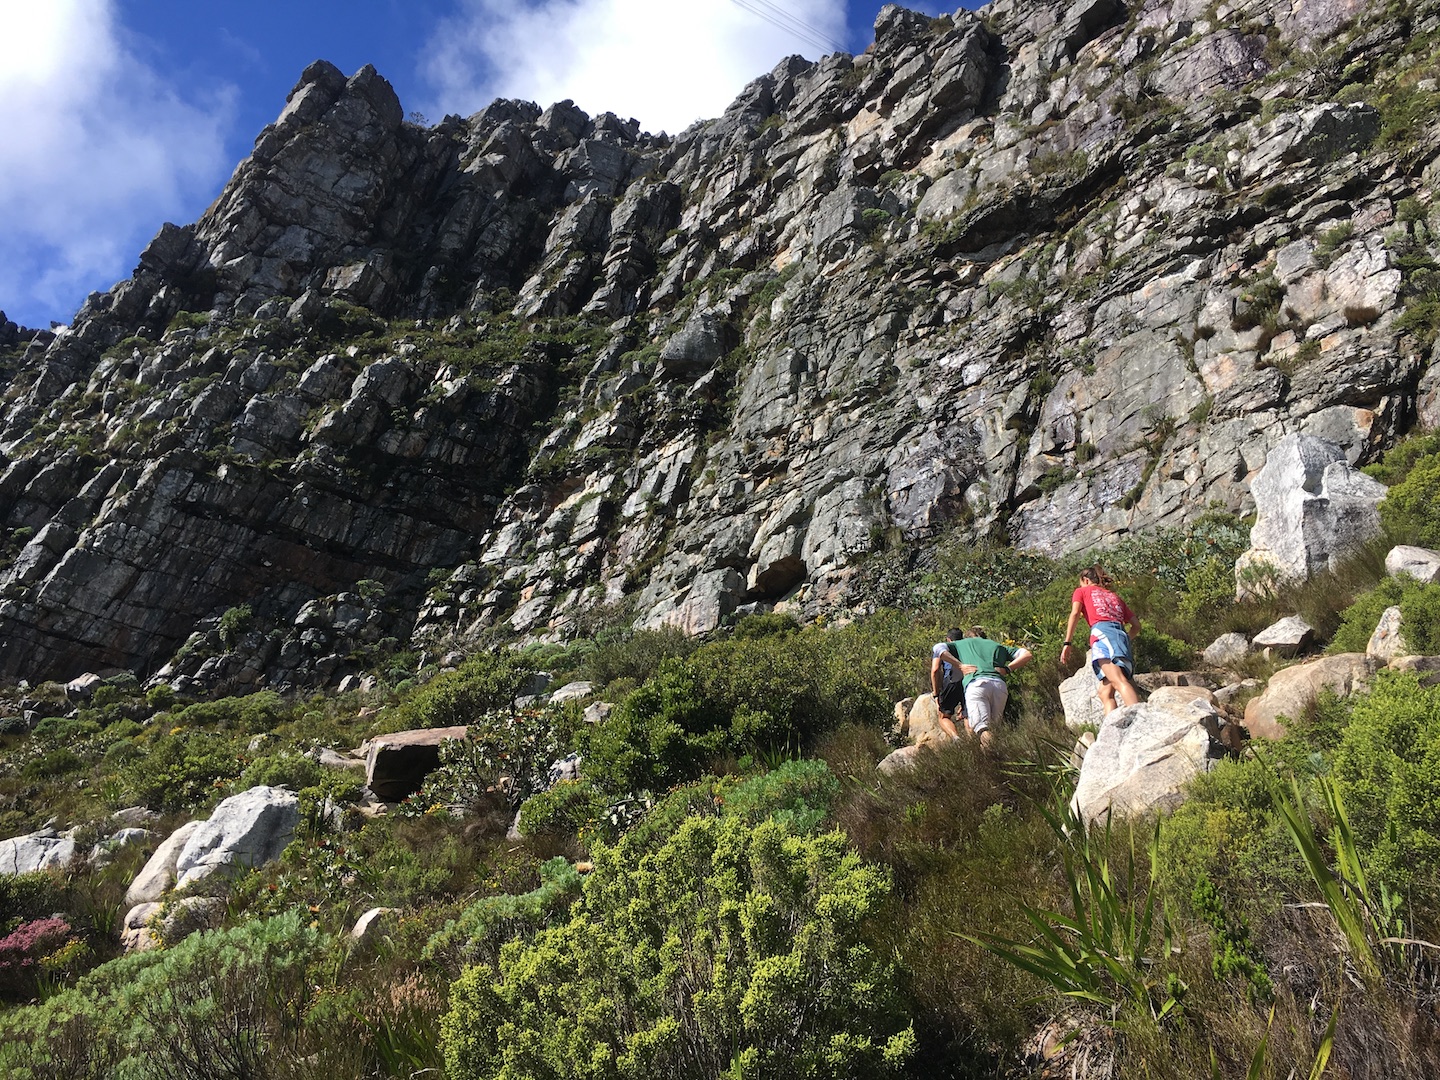 Planning a Table Mountain hike